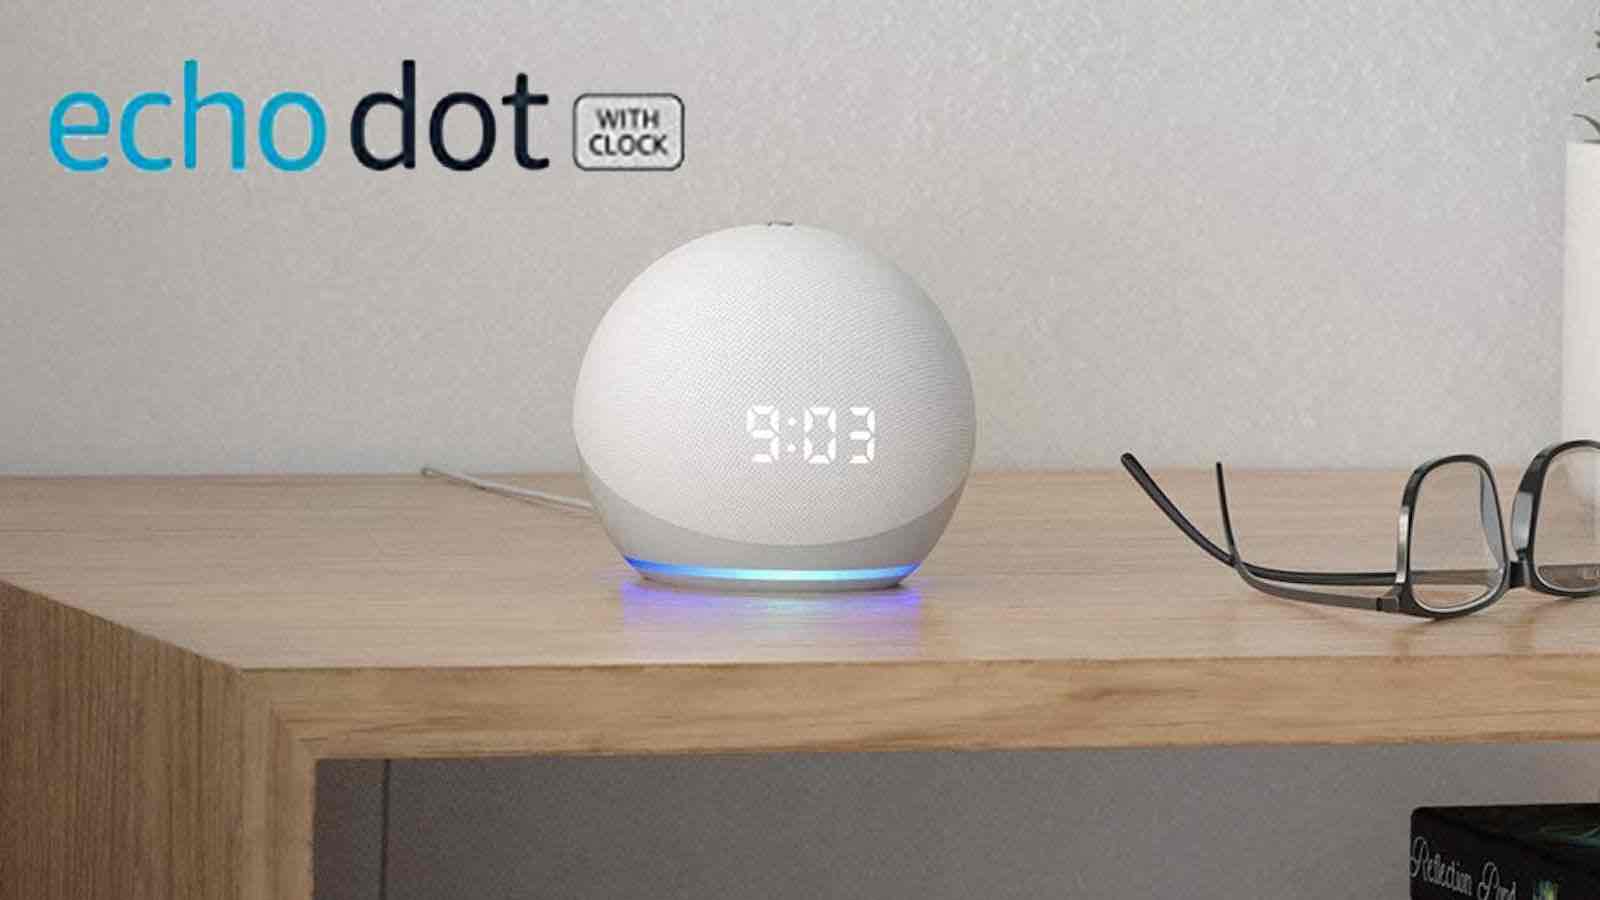 Best Affordable Smart Home Gadgets, best affordable smart home devices, best budget smart home security system, best low cost smart house, best cheap smart home gadgets, best deals on smart home gadgets, most affordable smart home